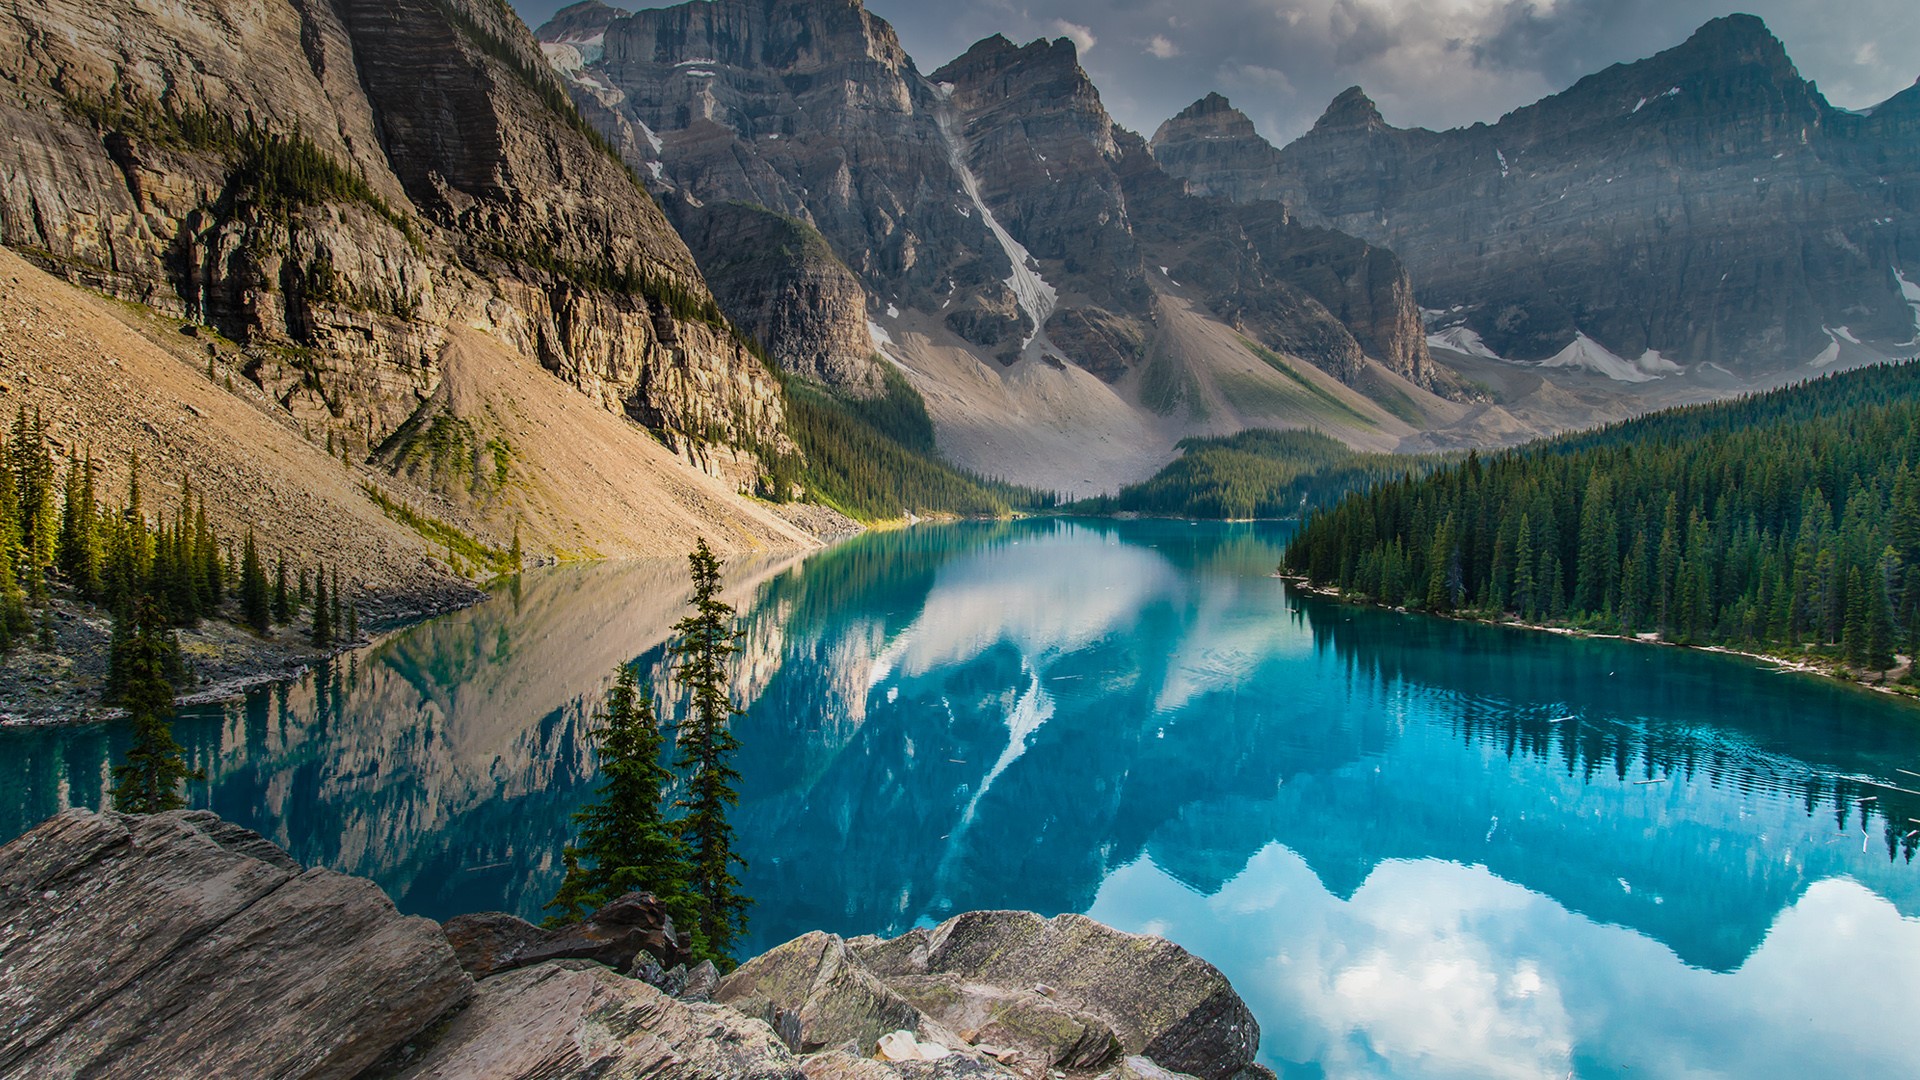 General 1920x1080 nature landscape clouds sand rocks mountains snow sky water forest pine trees reflection canyon Moraine Lake lake Alberta Canada